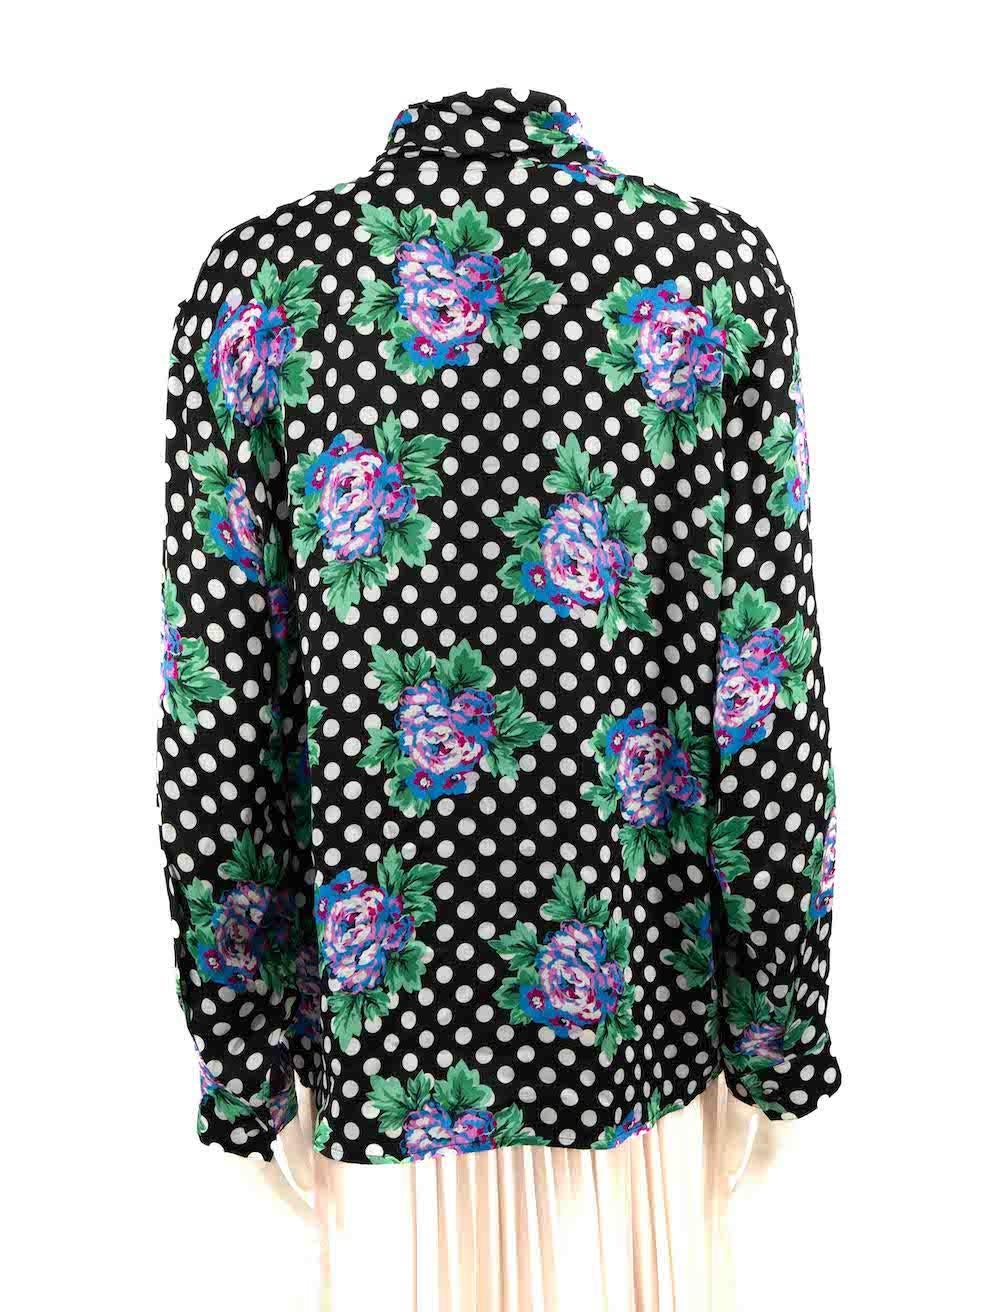 Balenciaga Floral Polka Dot Silk Blouse Size L In Good Condition For Sale In London, GB